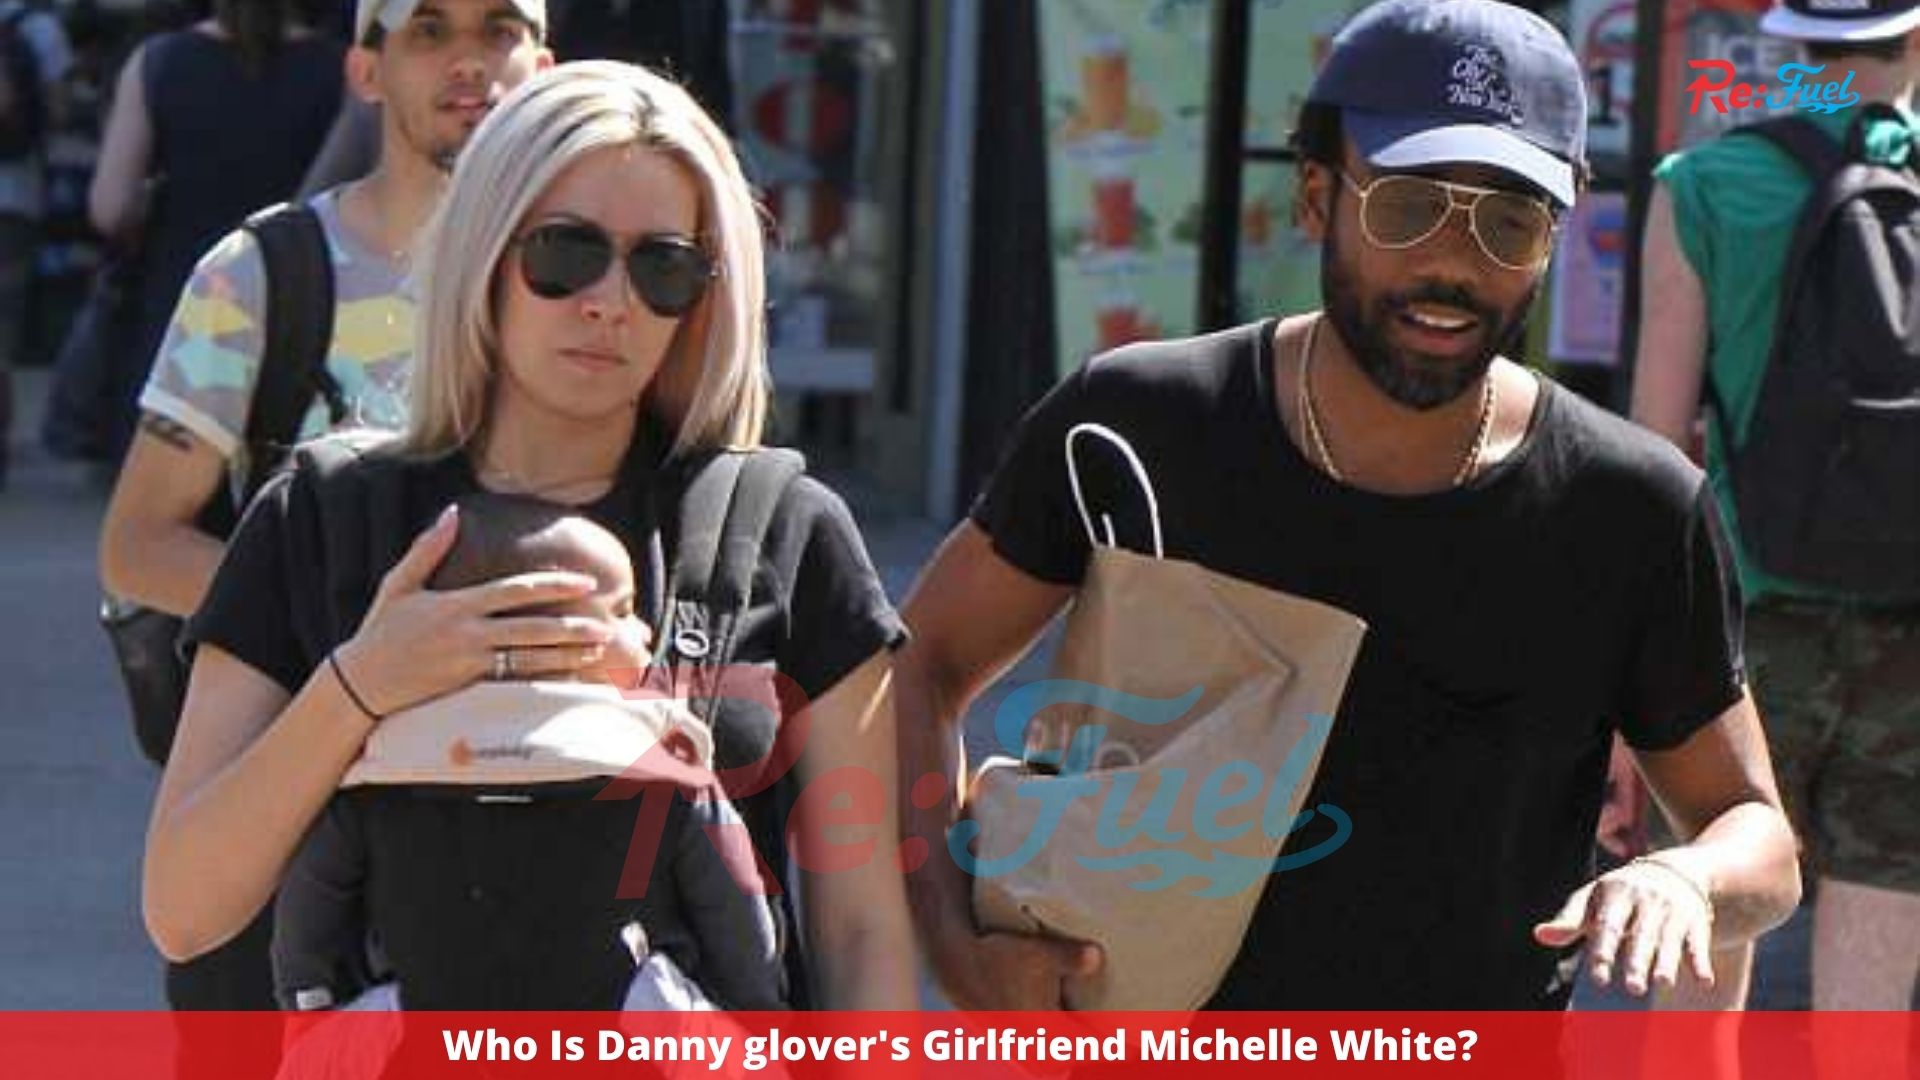 Who Is Danny glover's Girlfriend Michelle White?